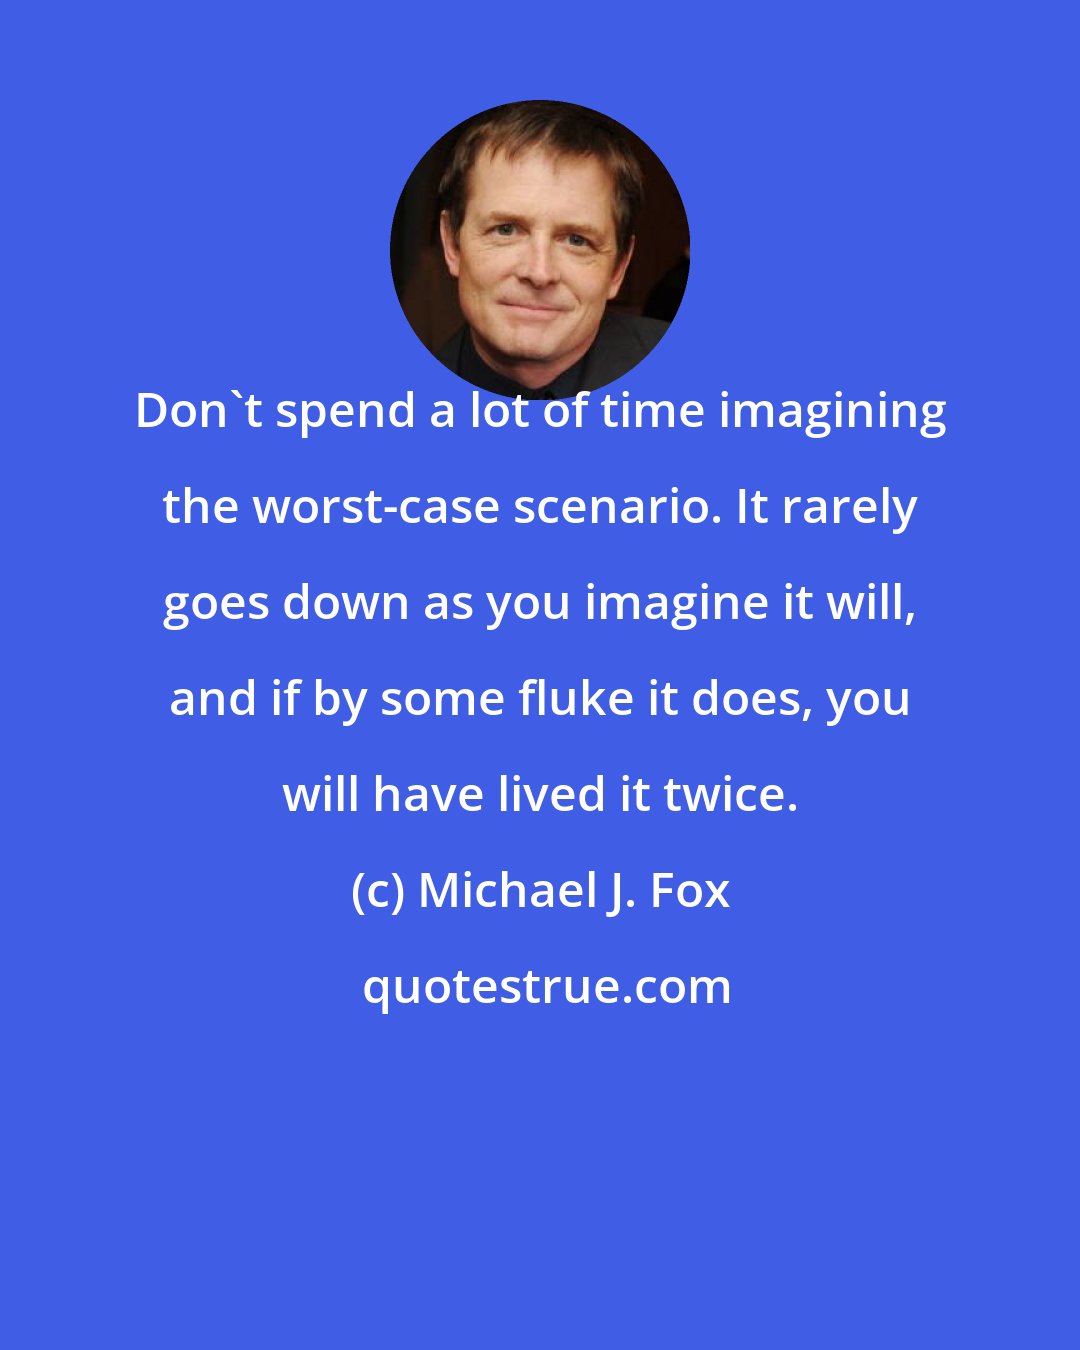 Michael J. Fox: Don't spend a lot of time imagining the worst-case scenario. It rarely goes down as you imagine it will, and if by some fluke it does, you will have lived it twice.